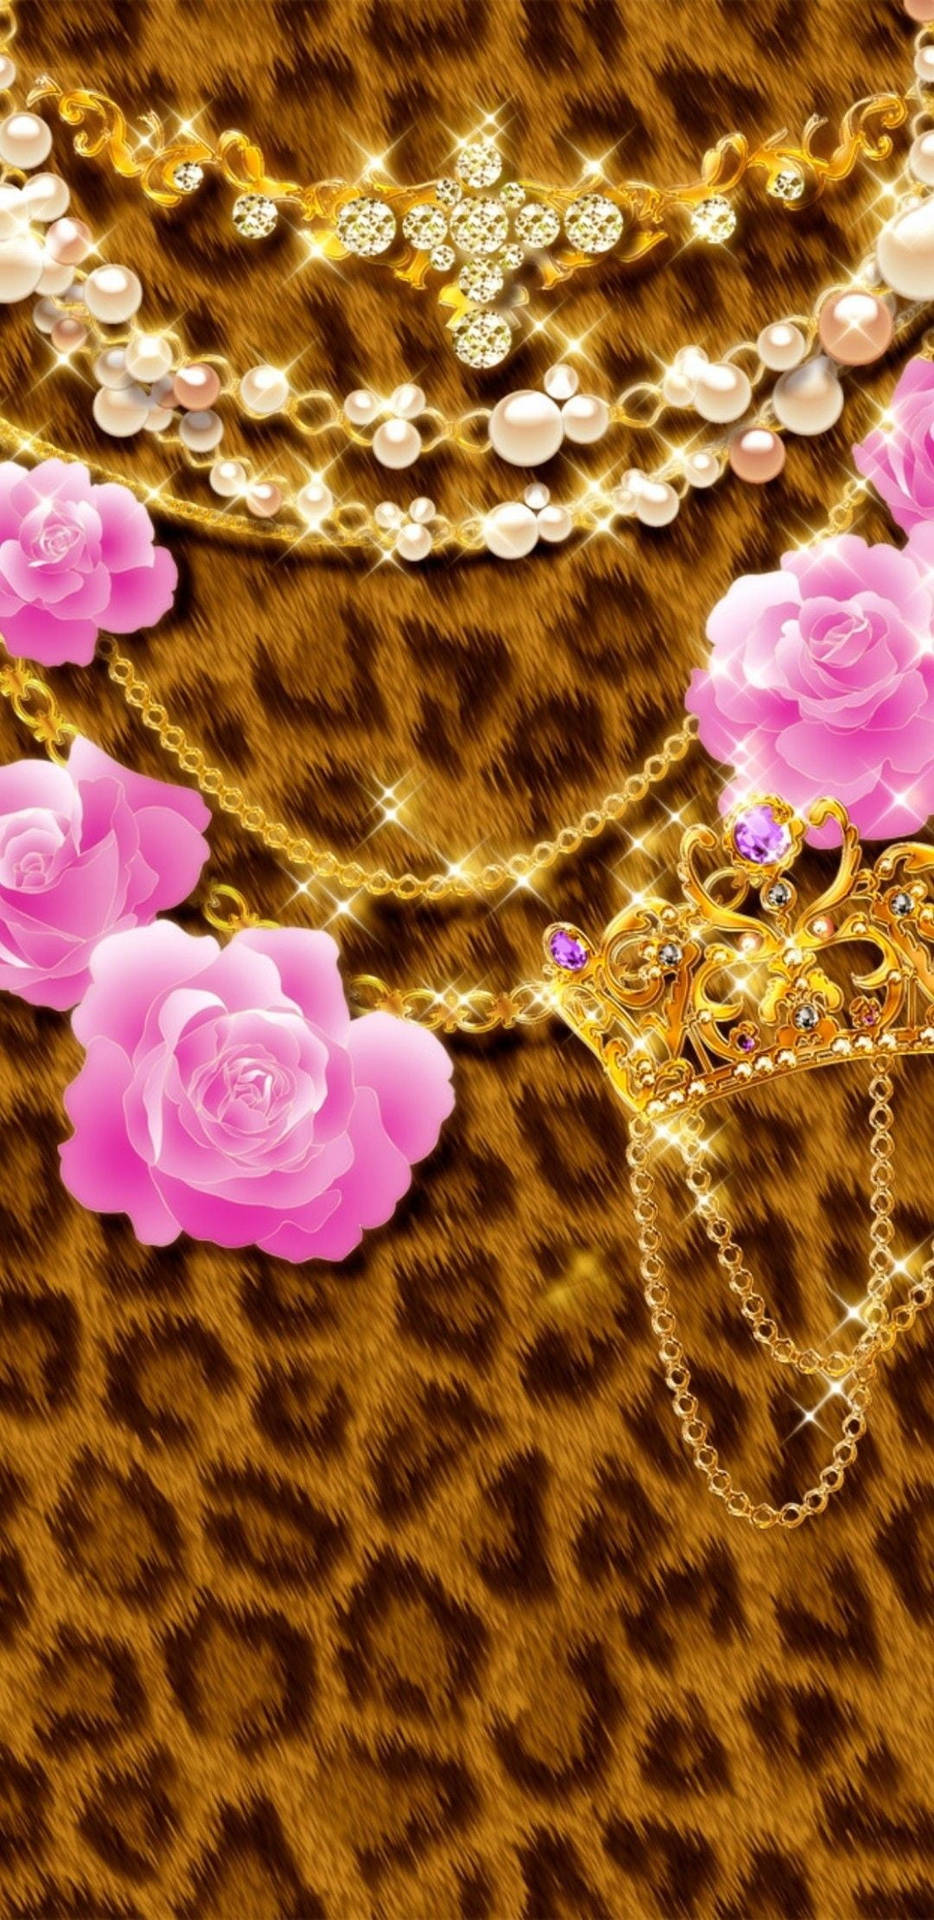 Bling And Flowers Cute Leopard Print Wallpaper